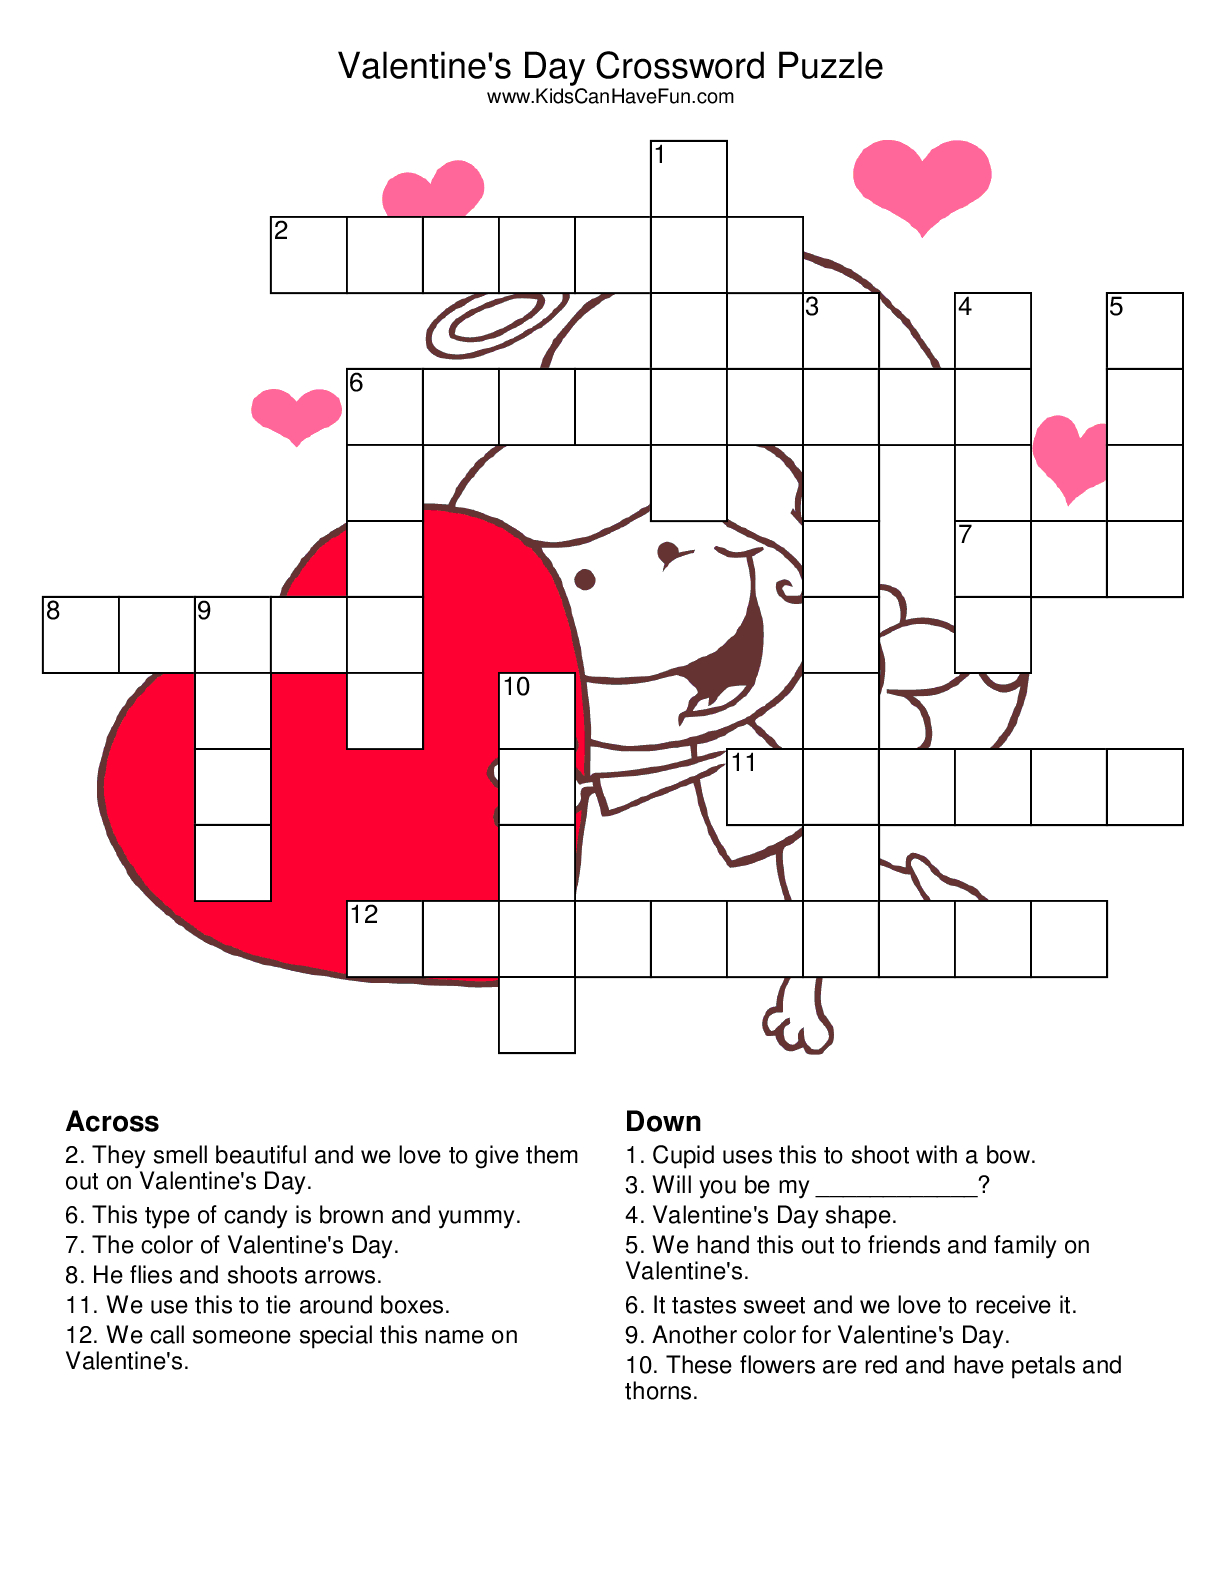 What A Great Way To Spend The Night With Your Love Then Being Smart - Printable Valentine Crossword Puzzles